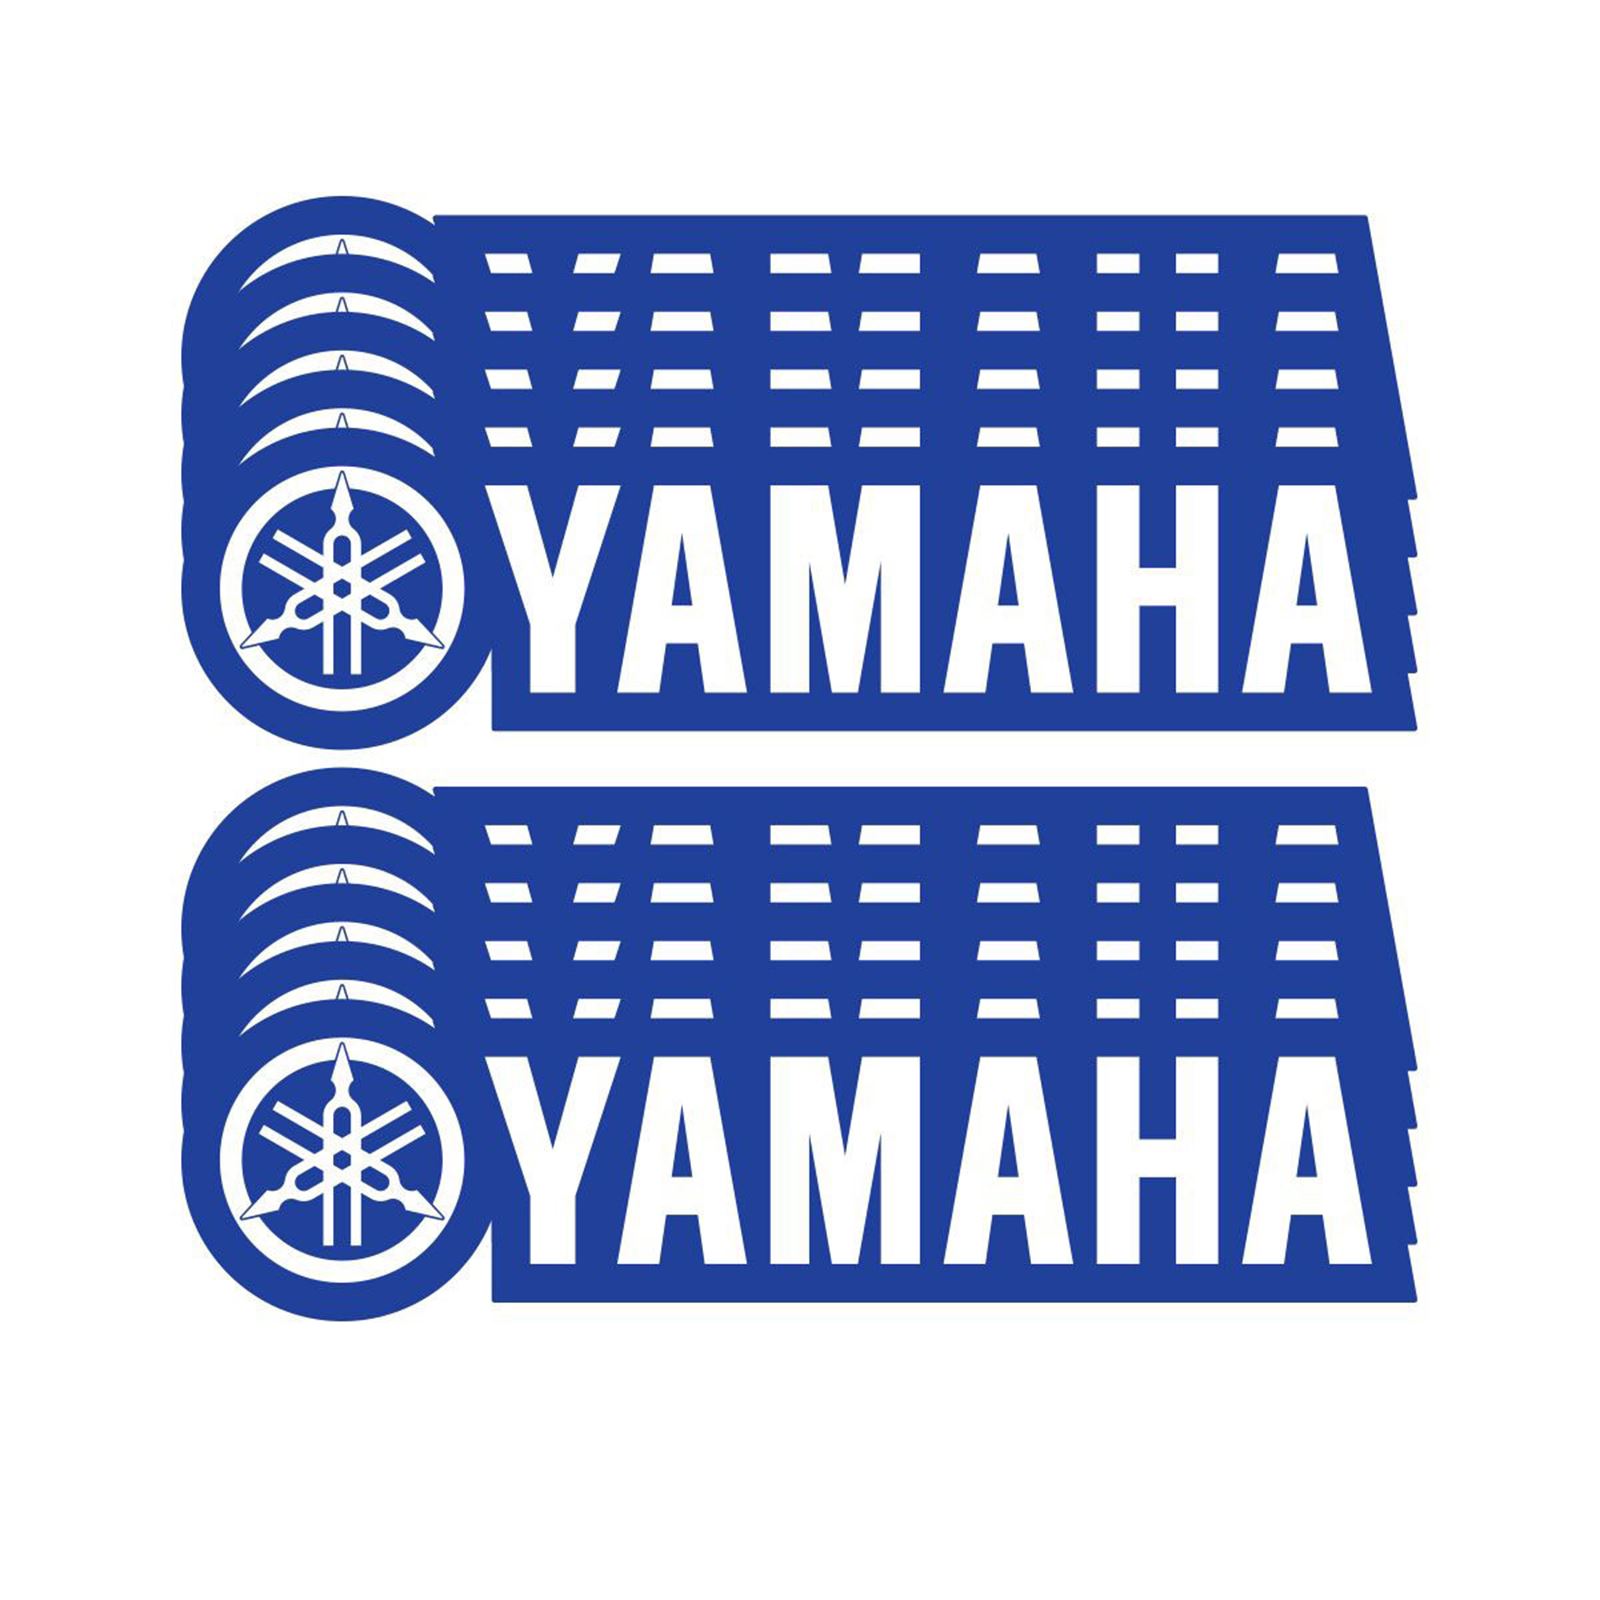 D Cor Decal for Yamaha - 6" - 10 Pack